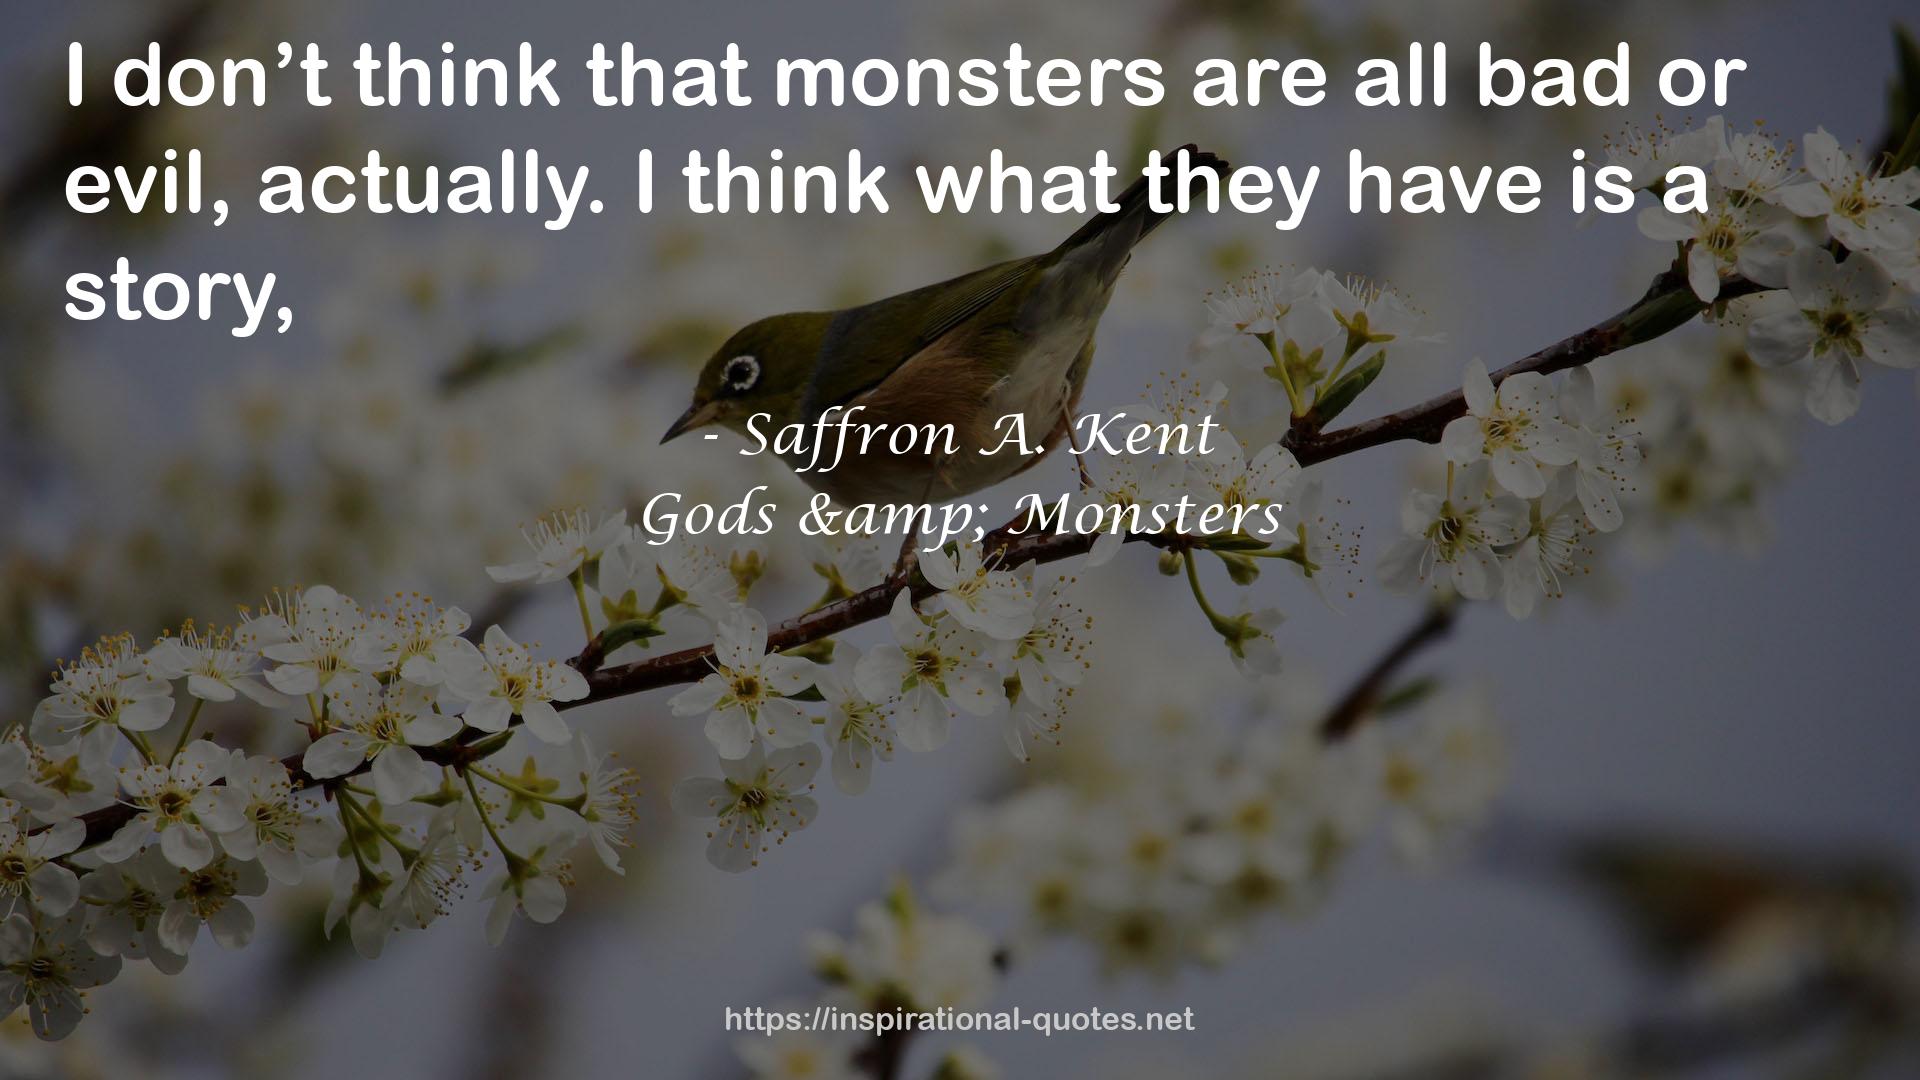 Gods & Monsters QUOTES